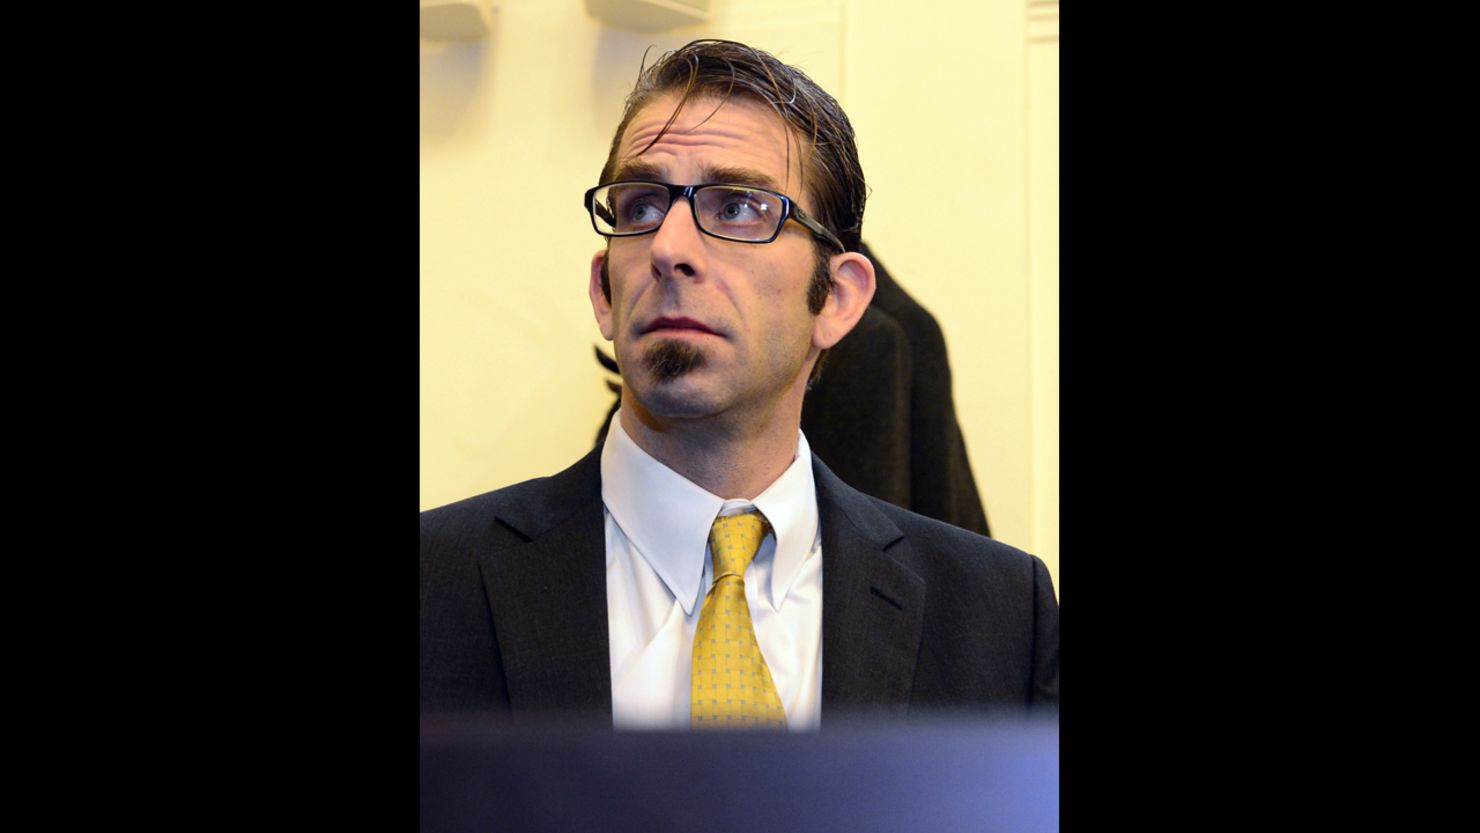 A panel of Czech judges ruled that Randy Blythe was not largely to blame for the death of a teenage fan.